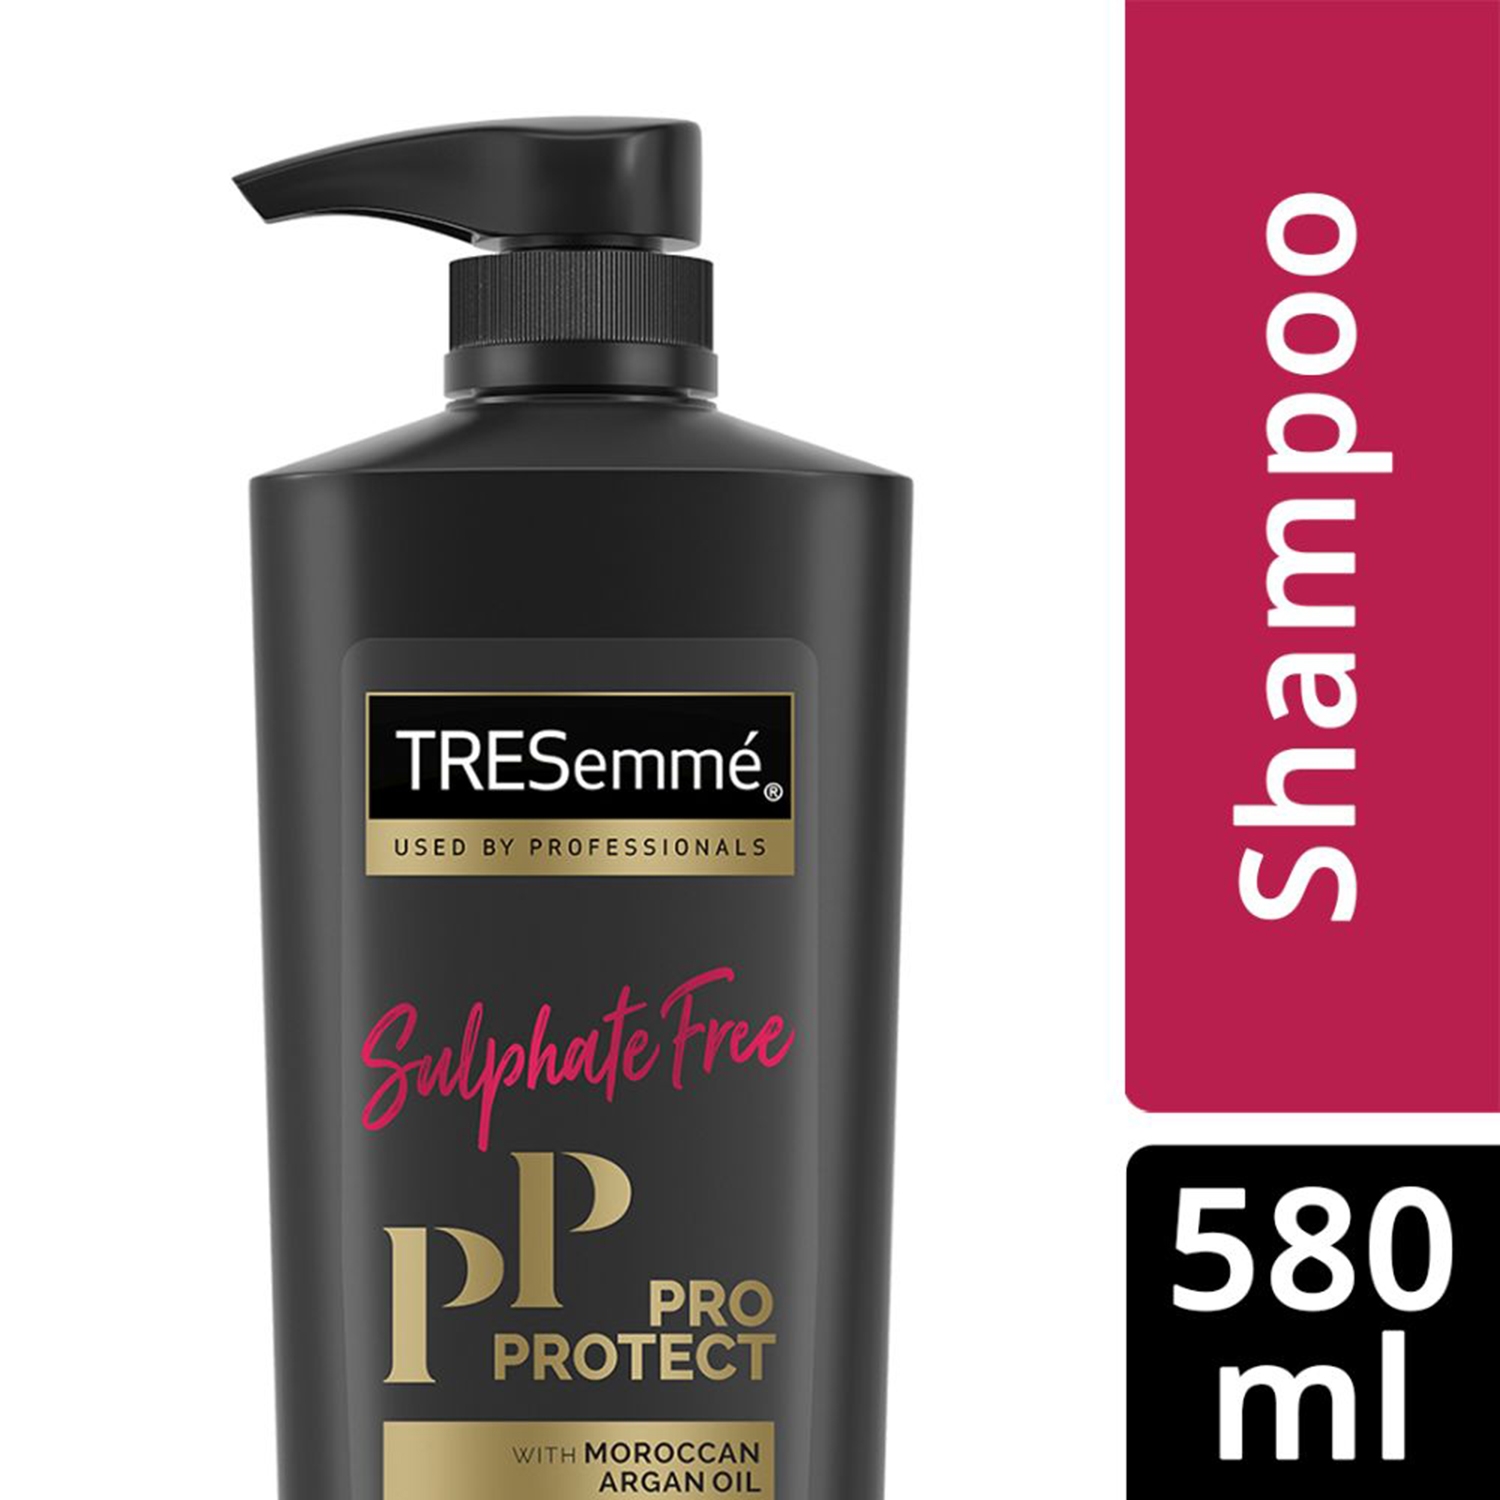 Tresemme | Tresemme Pro Protect Sulphate Free Shampoo - (580ml)